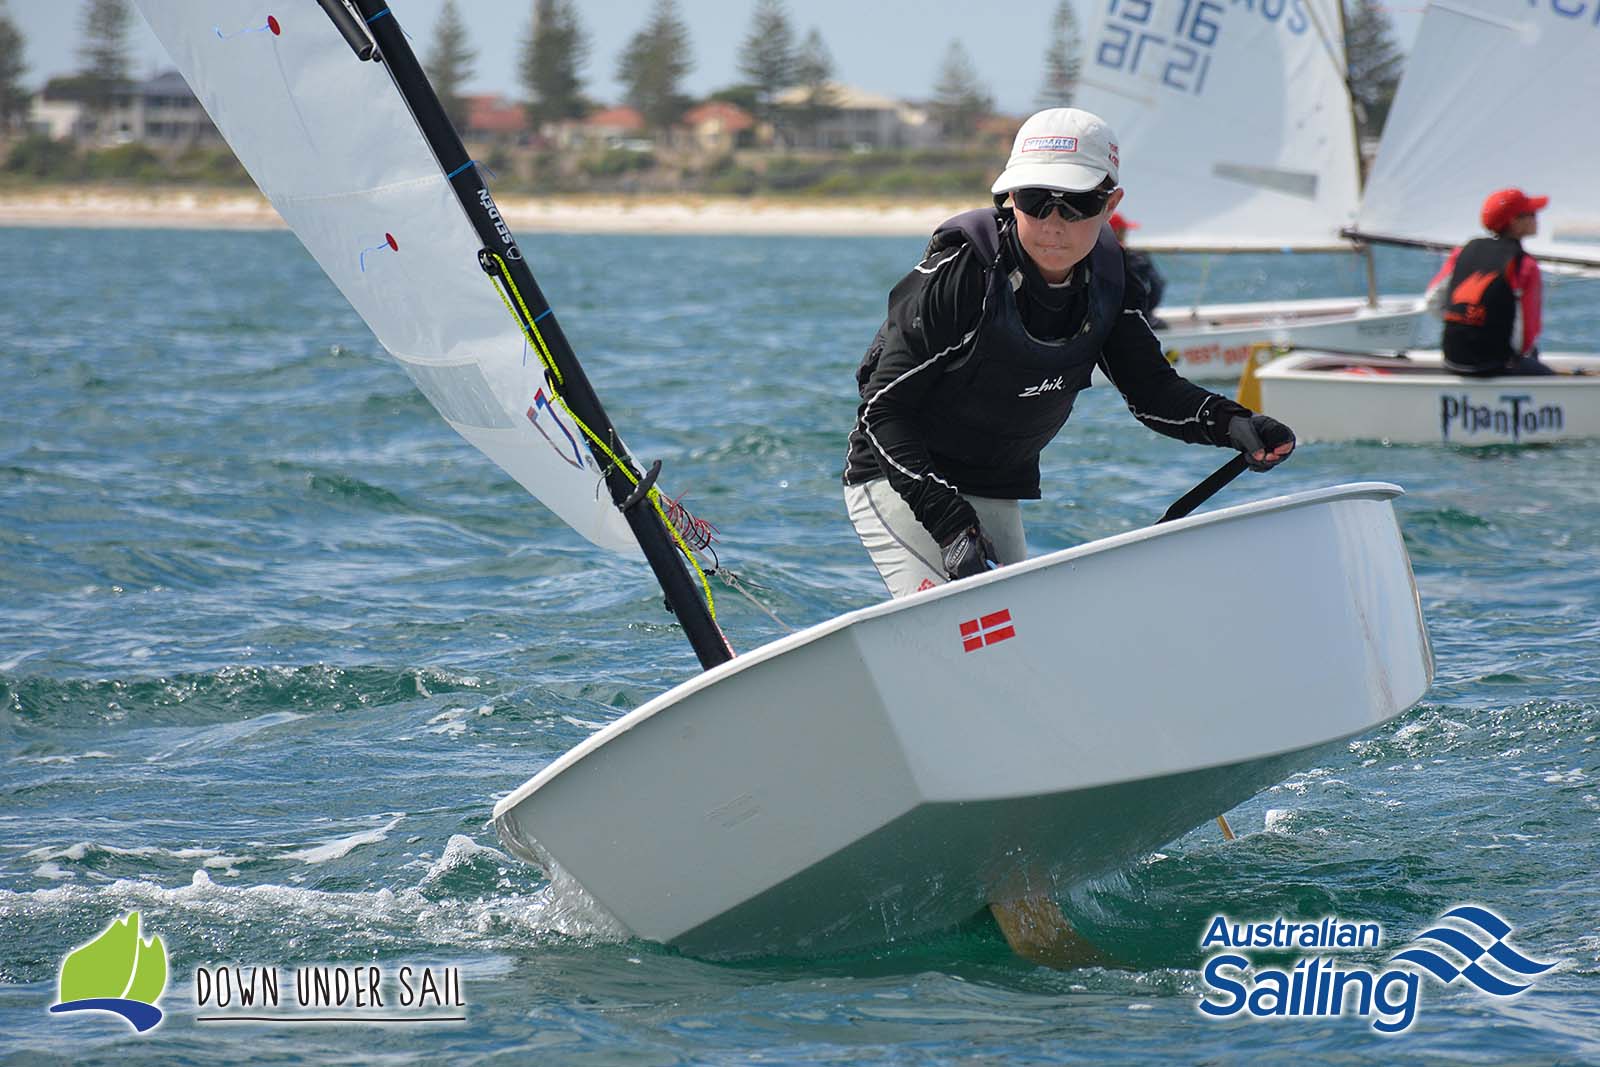 Adelaide Sailing Club's Ben Hinks will be competing in the Optimist Open fleet.